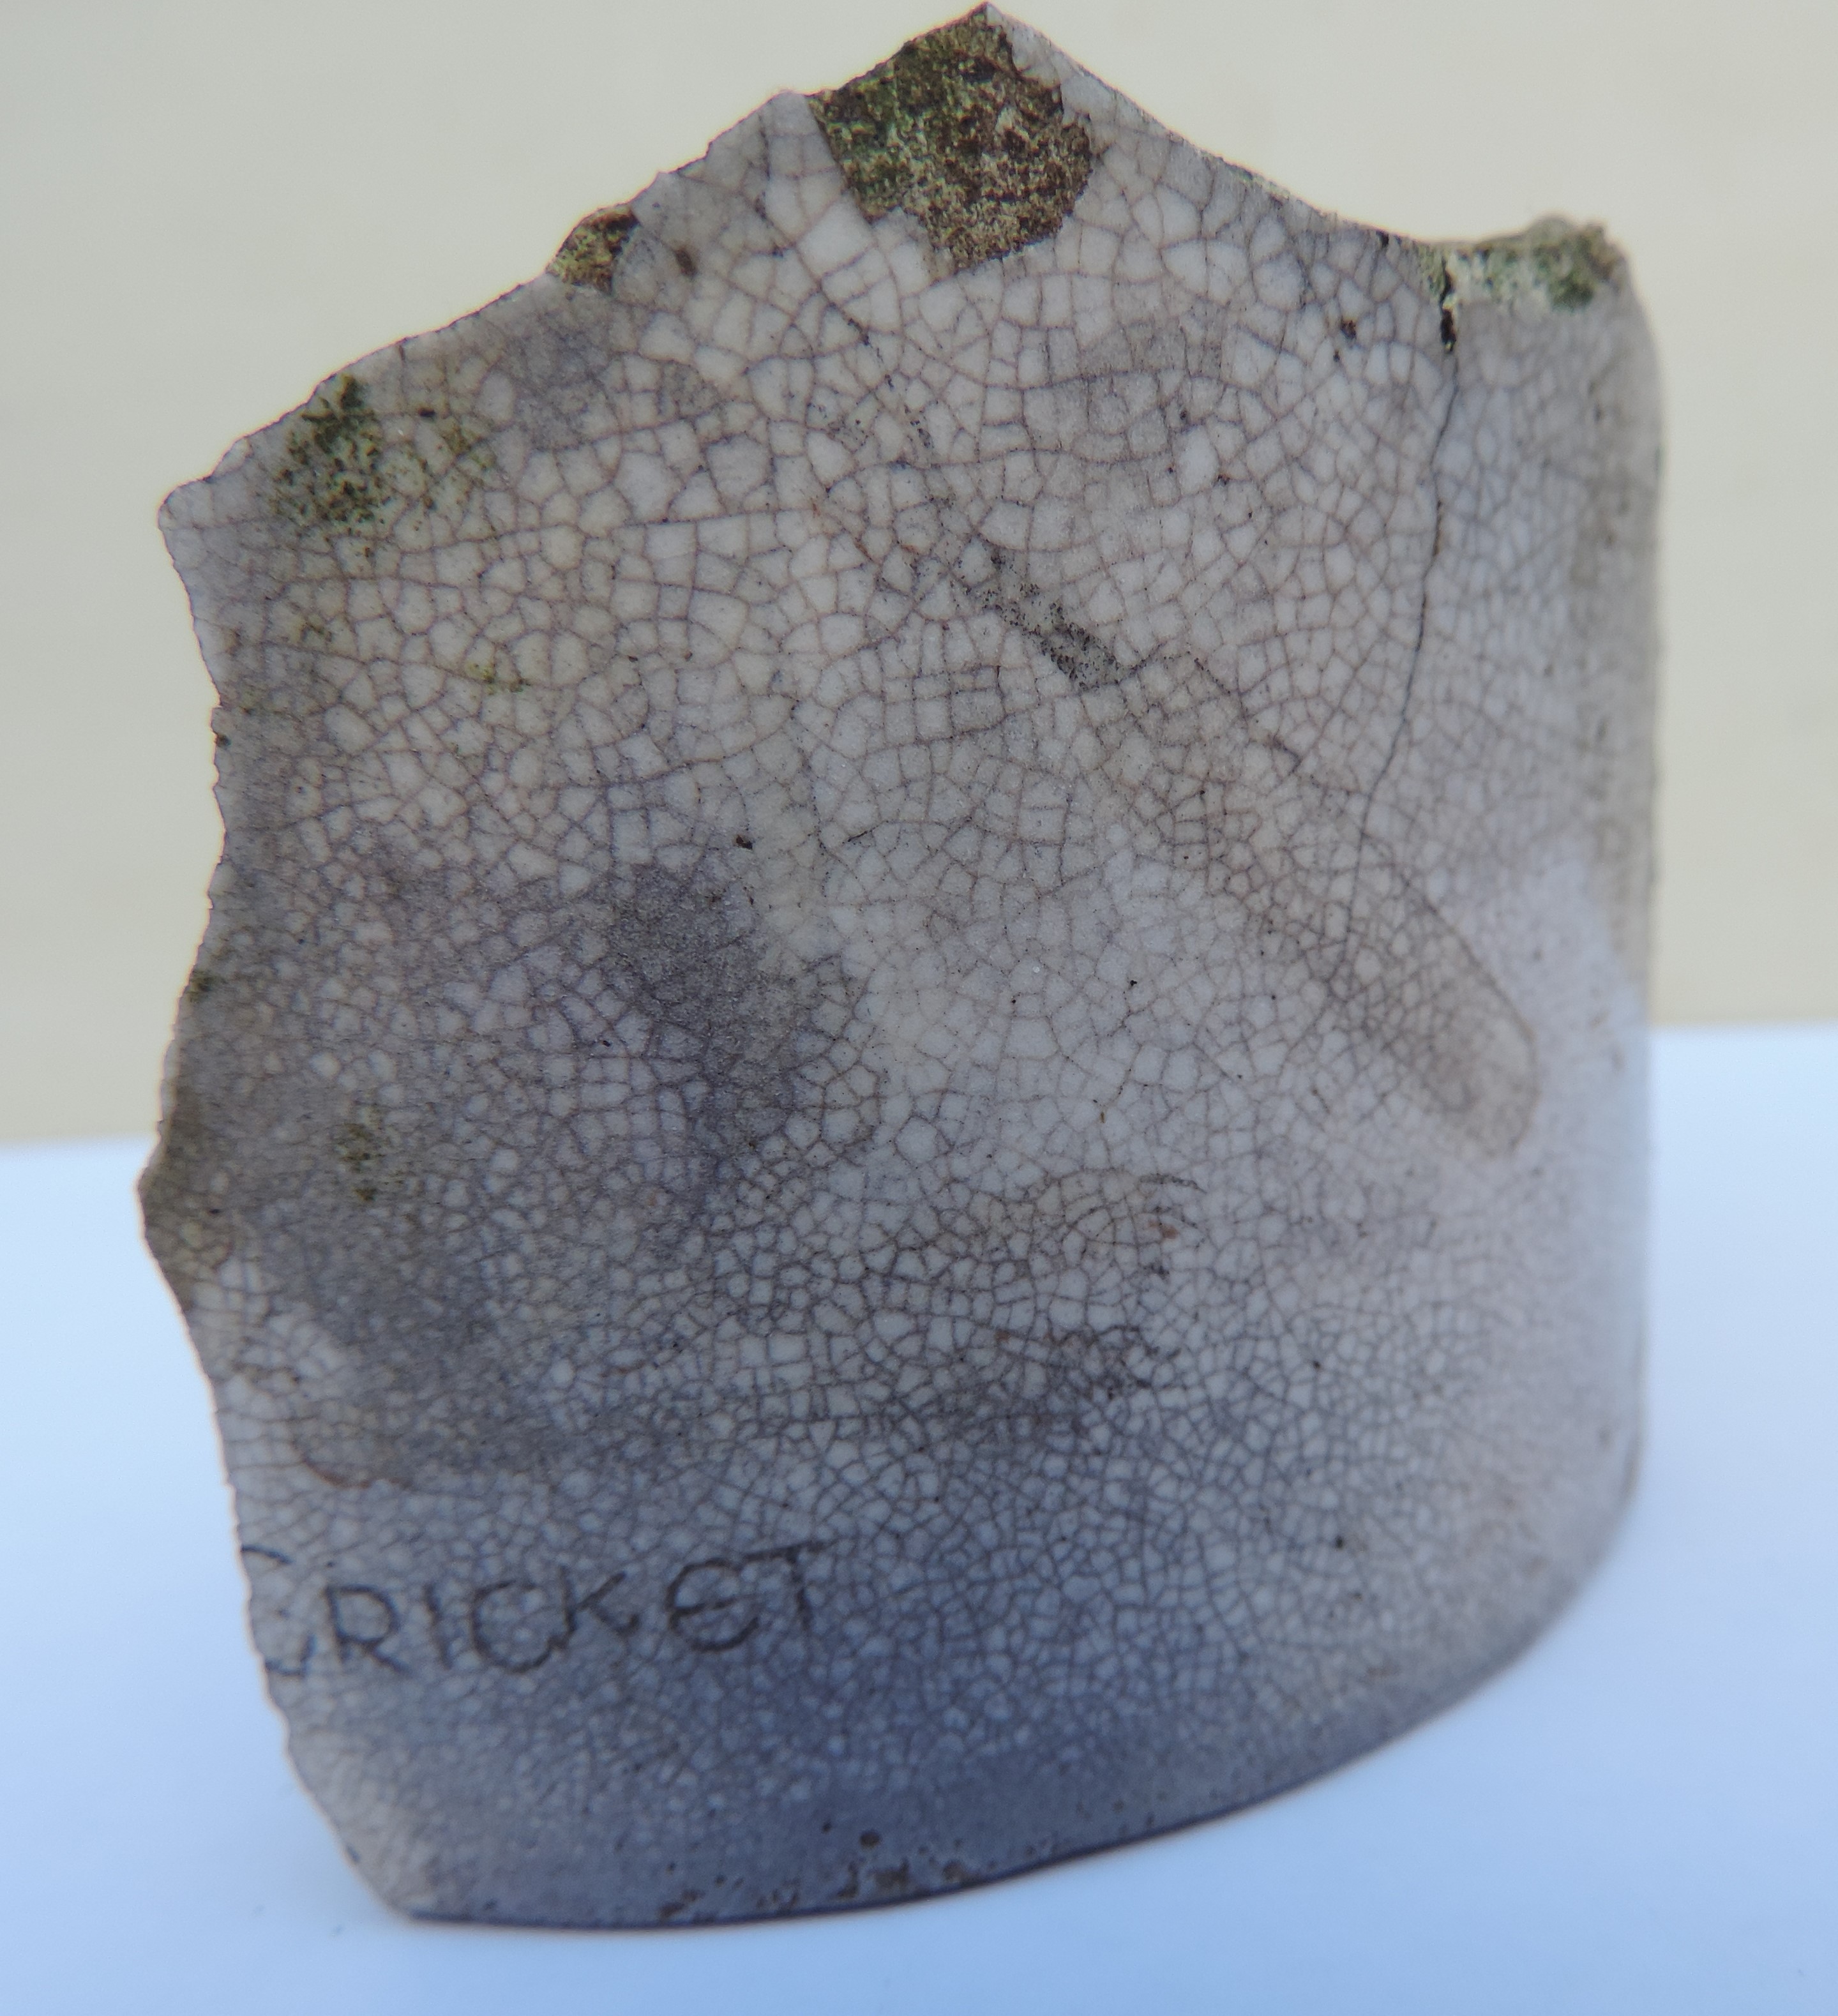 Photograph of a ceramic vessel with the word cricket